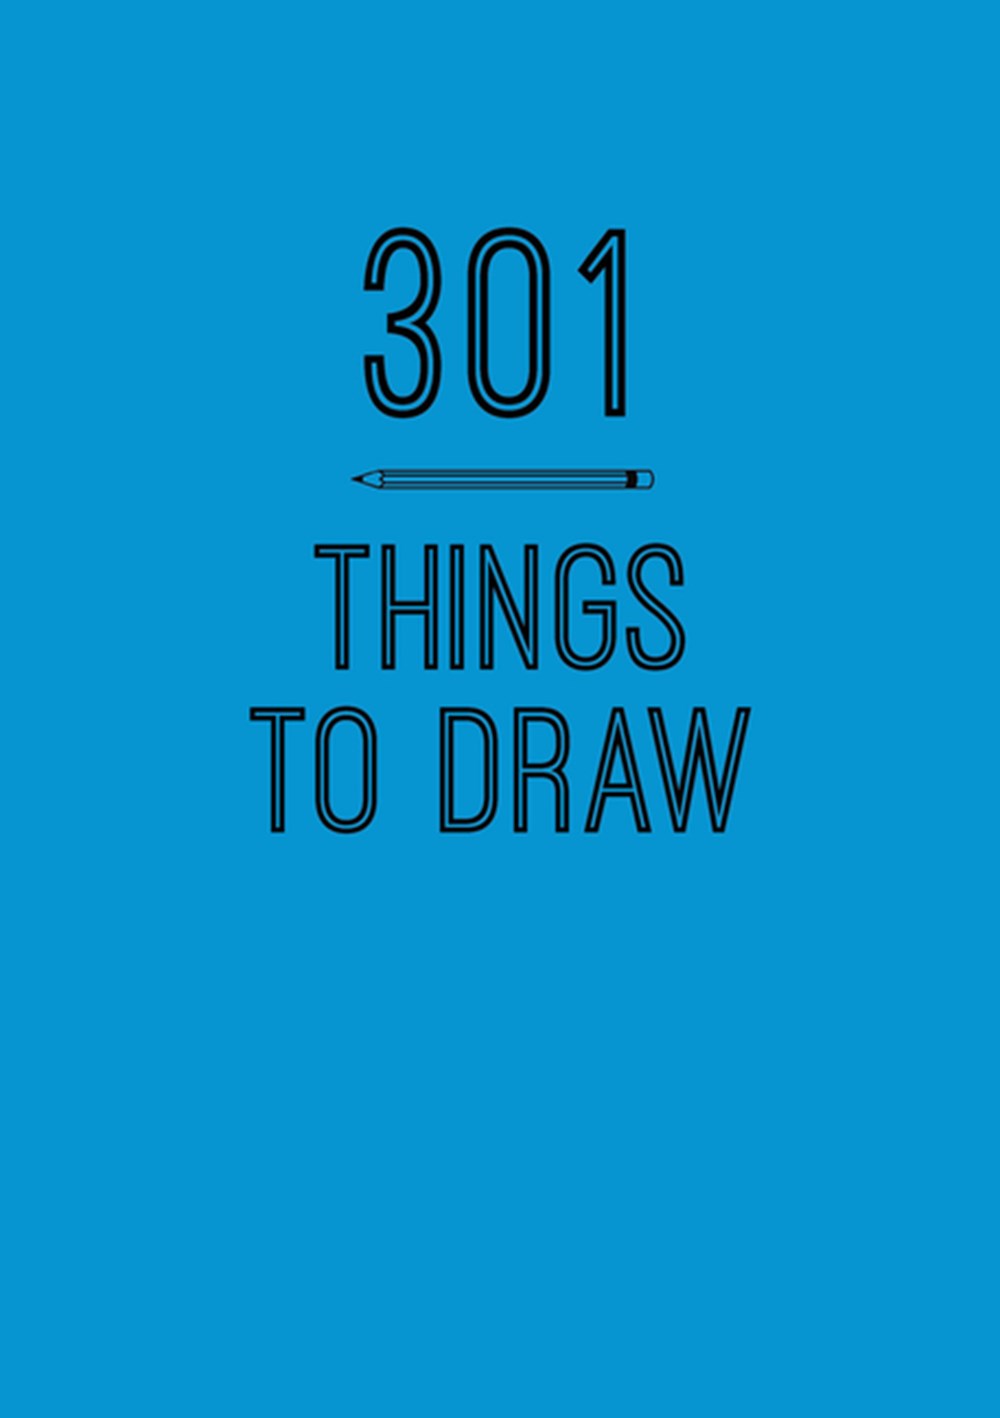 301 Things to Draw Creative Prompts to Inspire Art